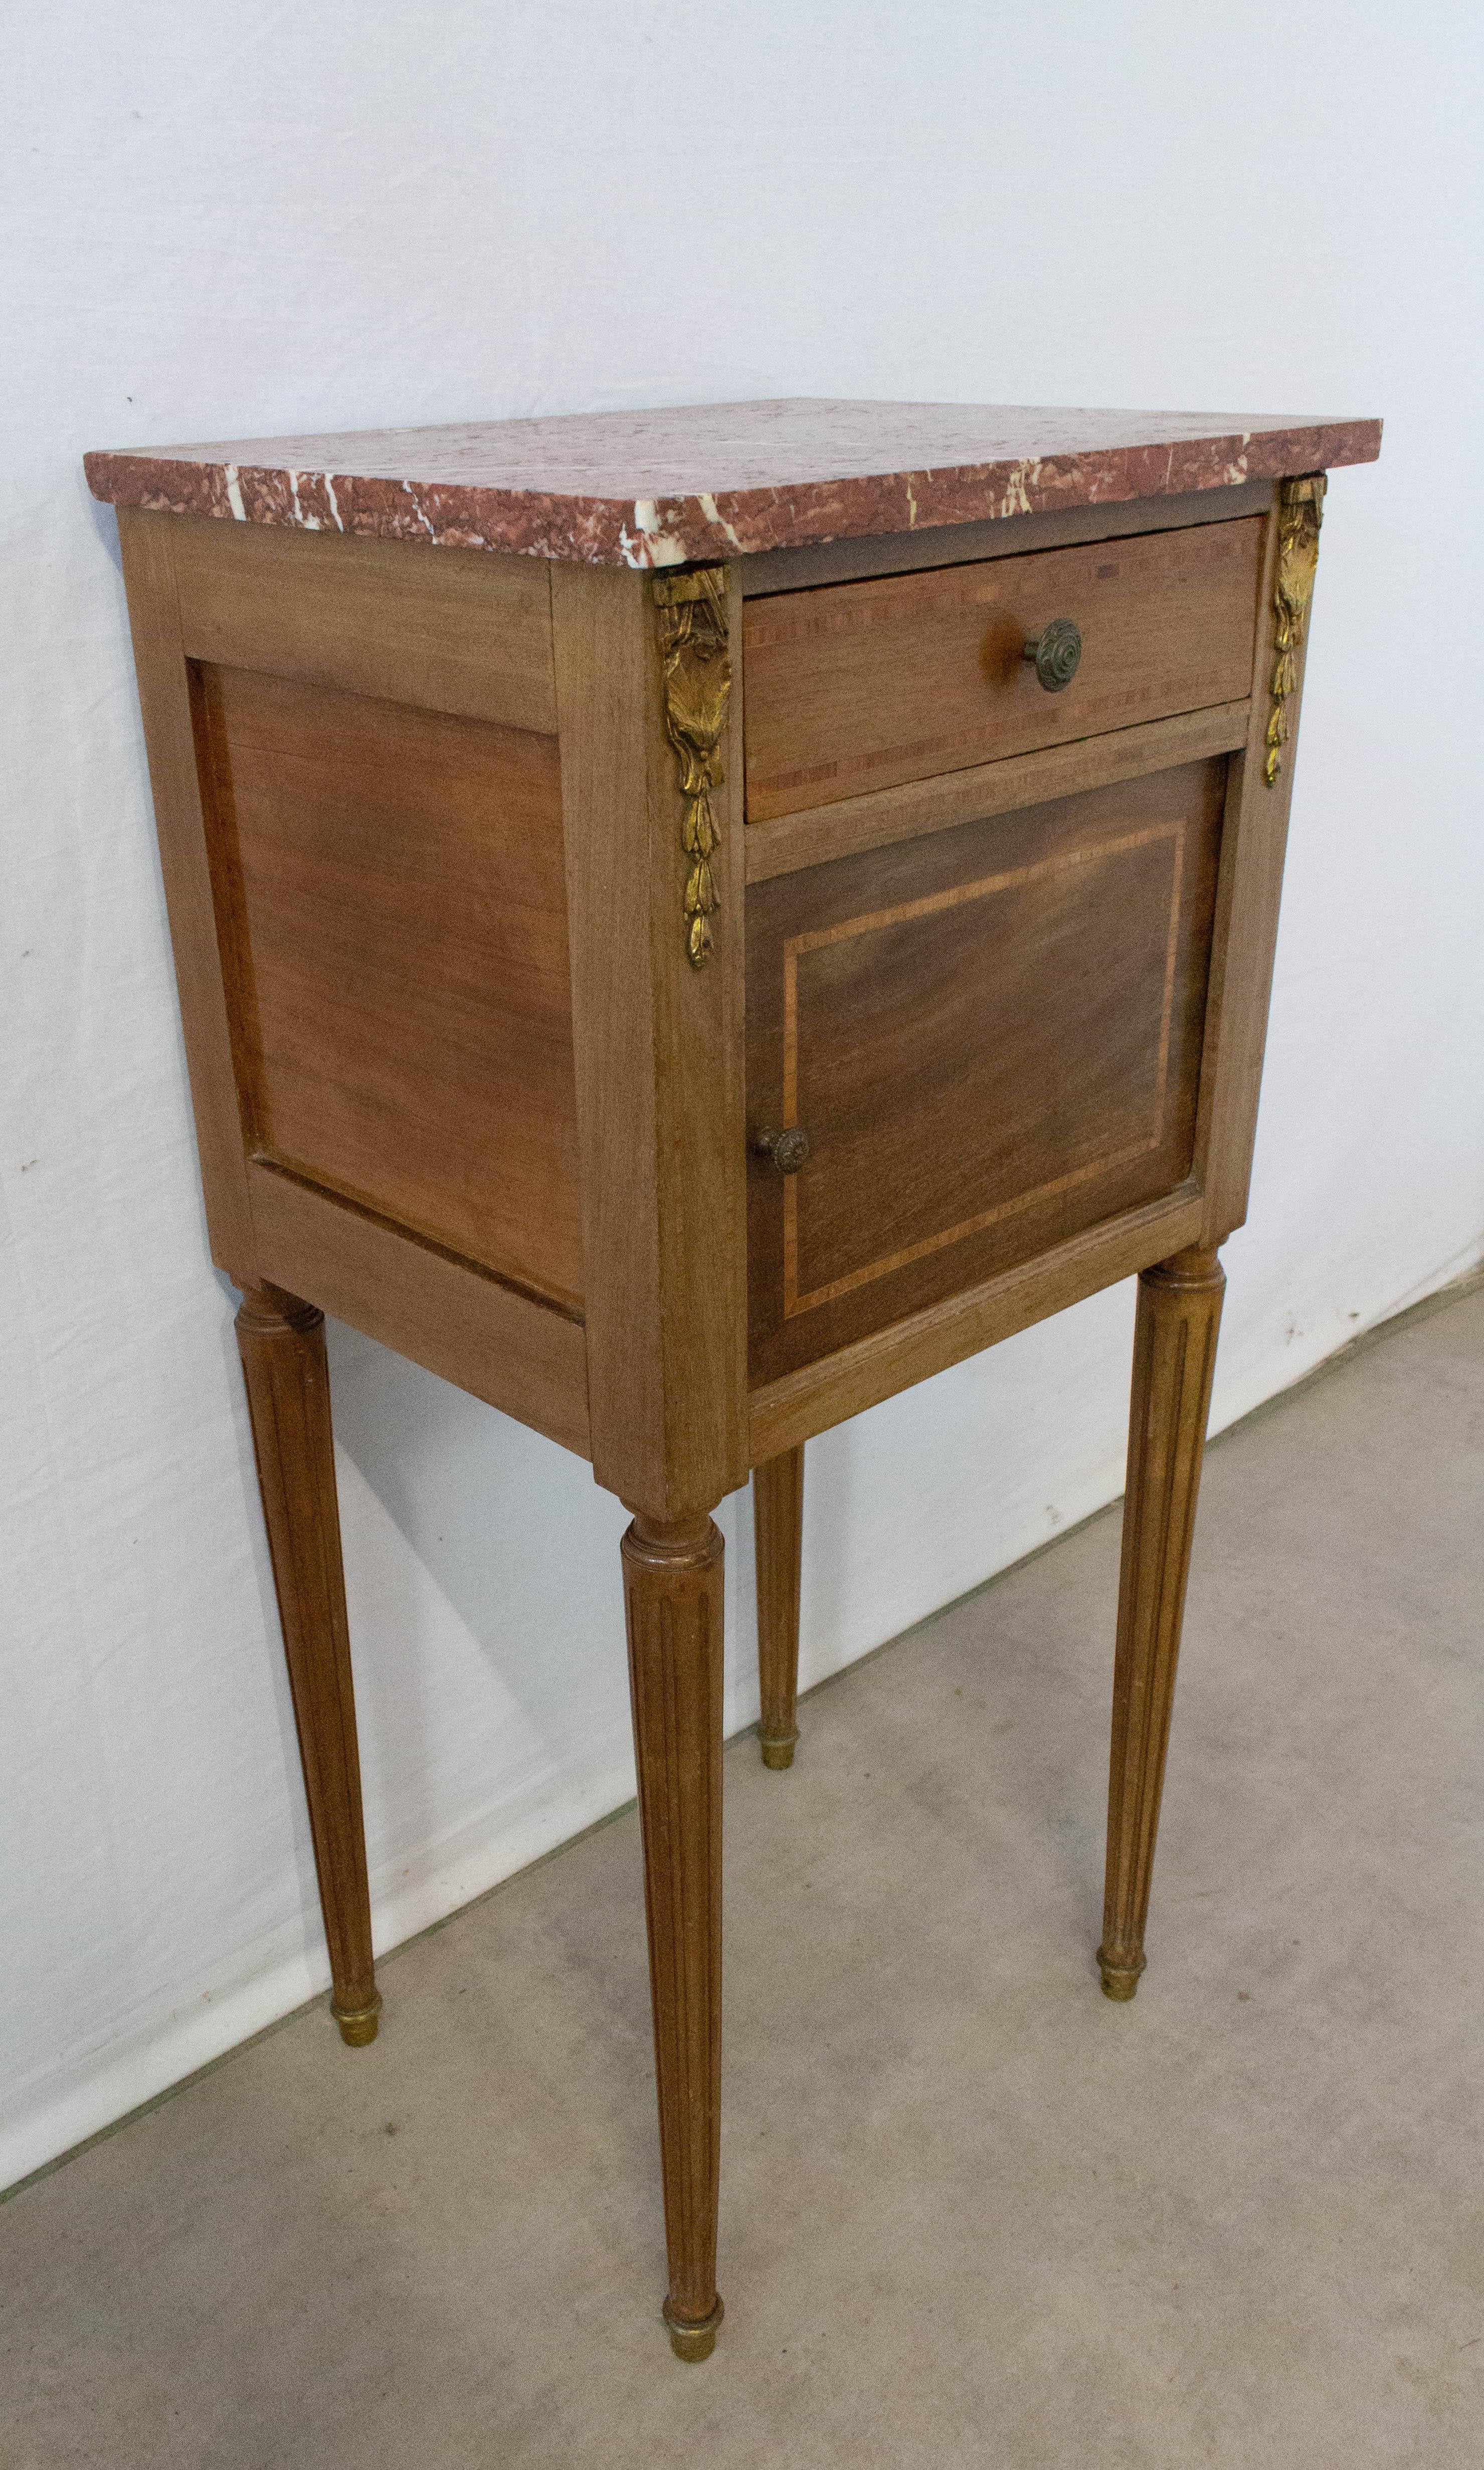 Antique French side cabinet nightstand bedside table
Rouge marble top, exotic wood inlay-ed and golden bronze
Single drawer
Cupboard with original porcelain liner that can be removed if preferred
Good antique condition for its age with only minor